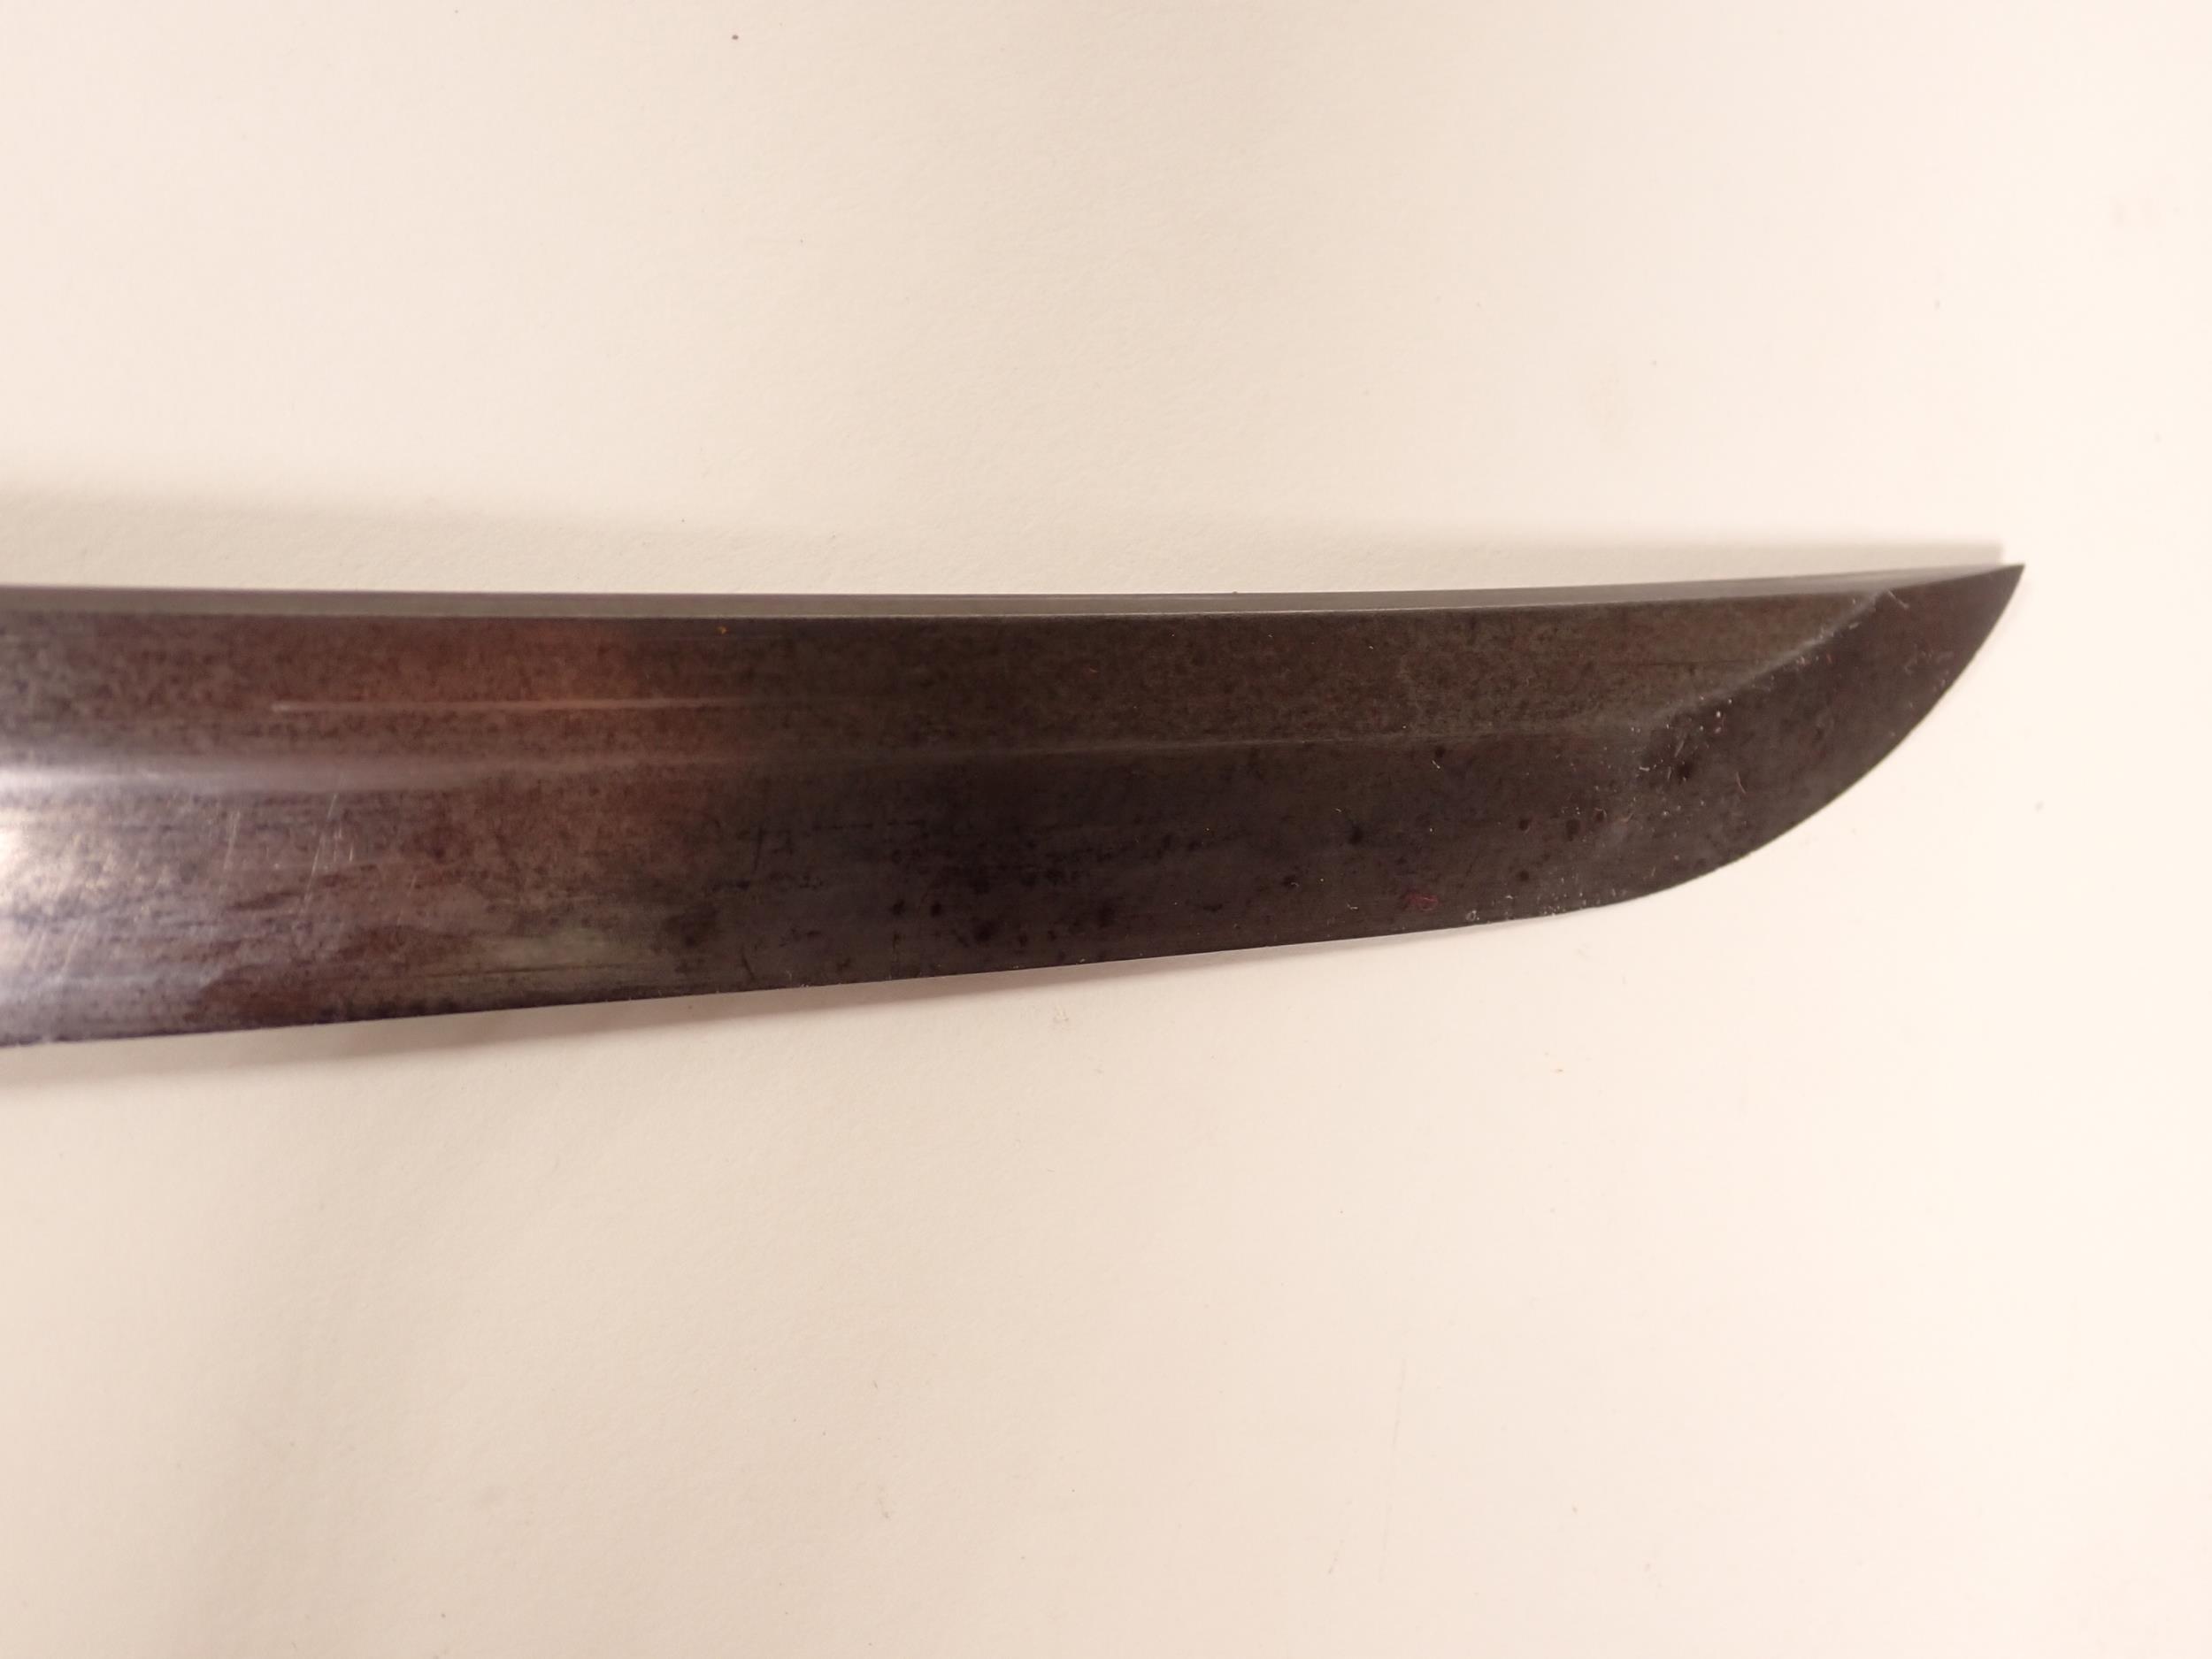 A Japanese Katana by Ishido Teruhide in WWII military mounts. This smith was descended from the - Image 13 of 19